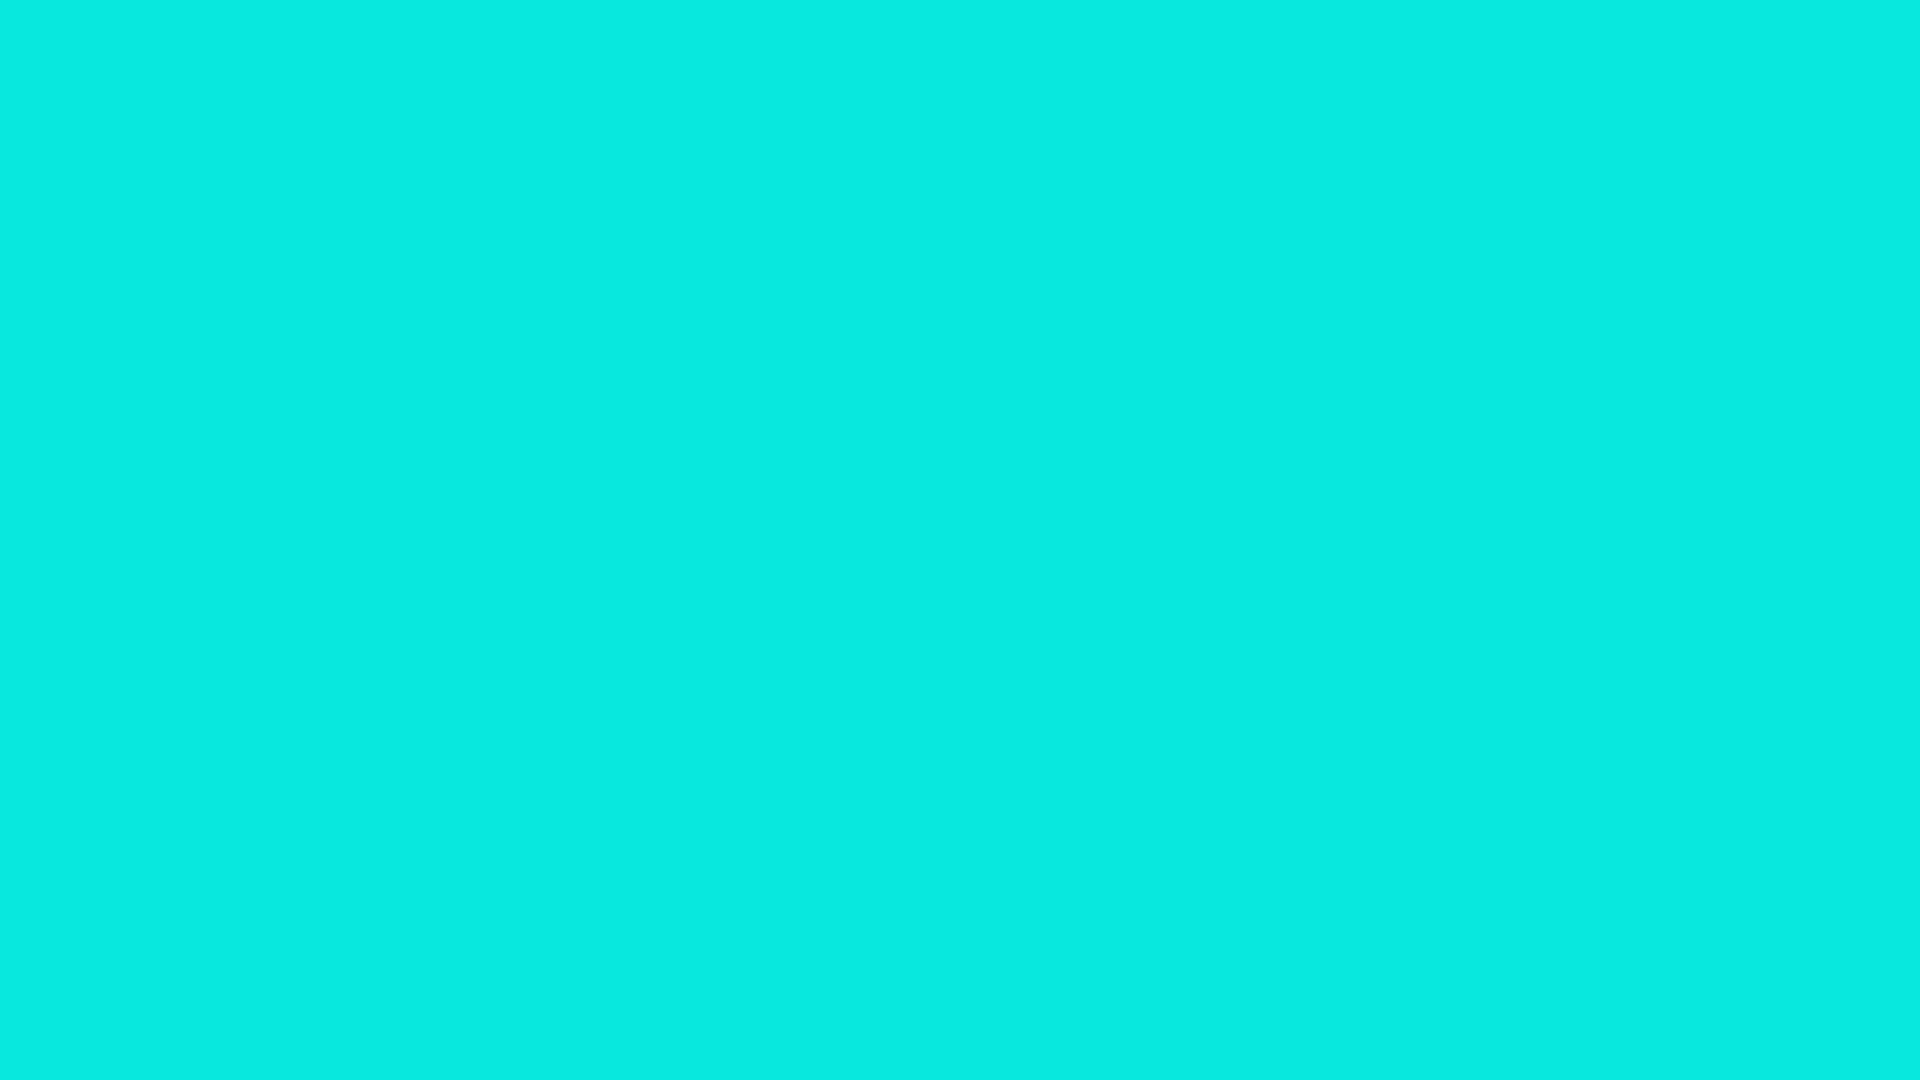 1920x1080 Bright Turquoise Solid Color Background